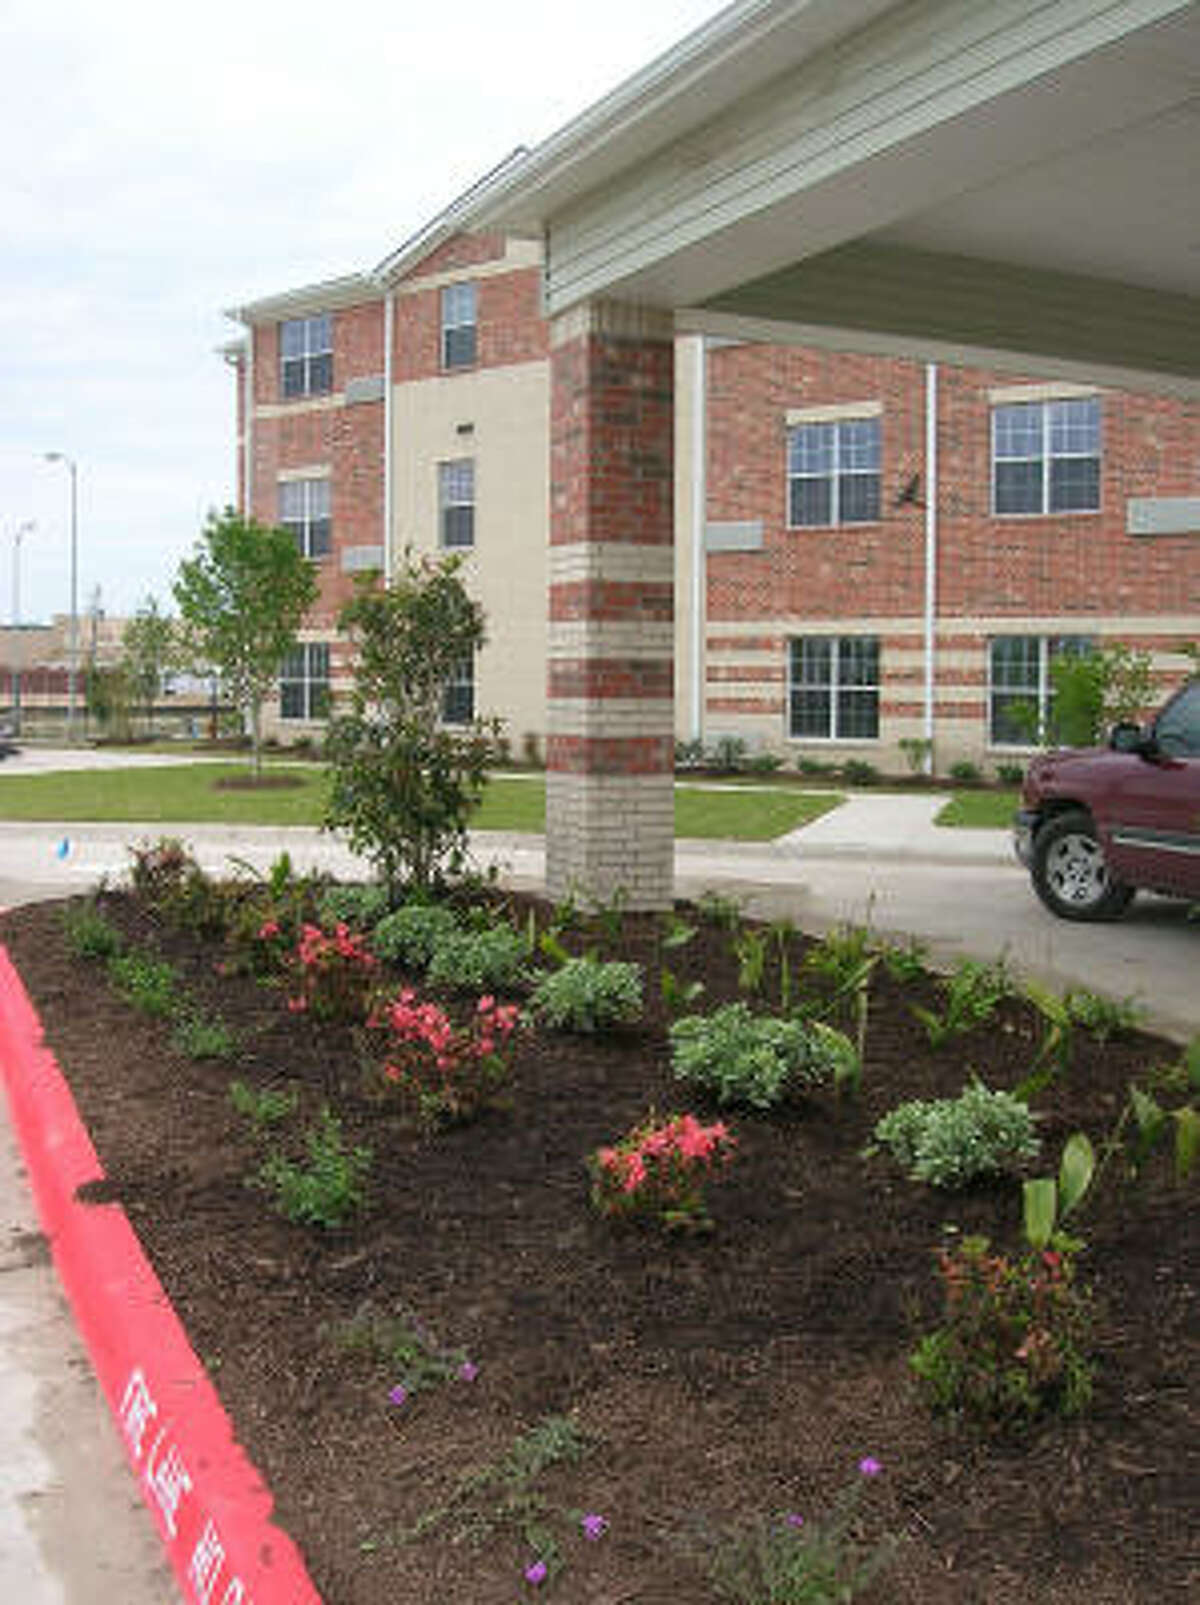 Fresh flowers and plants decorate the main entrance at the new-and-opening soon Bayou Glen Housing (an affordable senior housing community owned and operated by National Church Residences) at 11810 Southglen in the Alief area. Photo date 4-1-09.